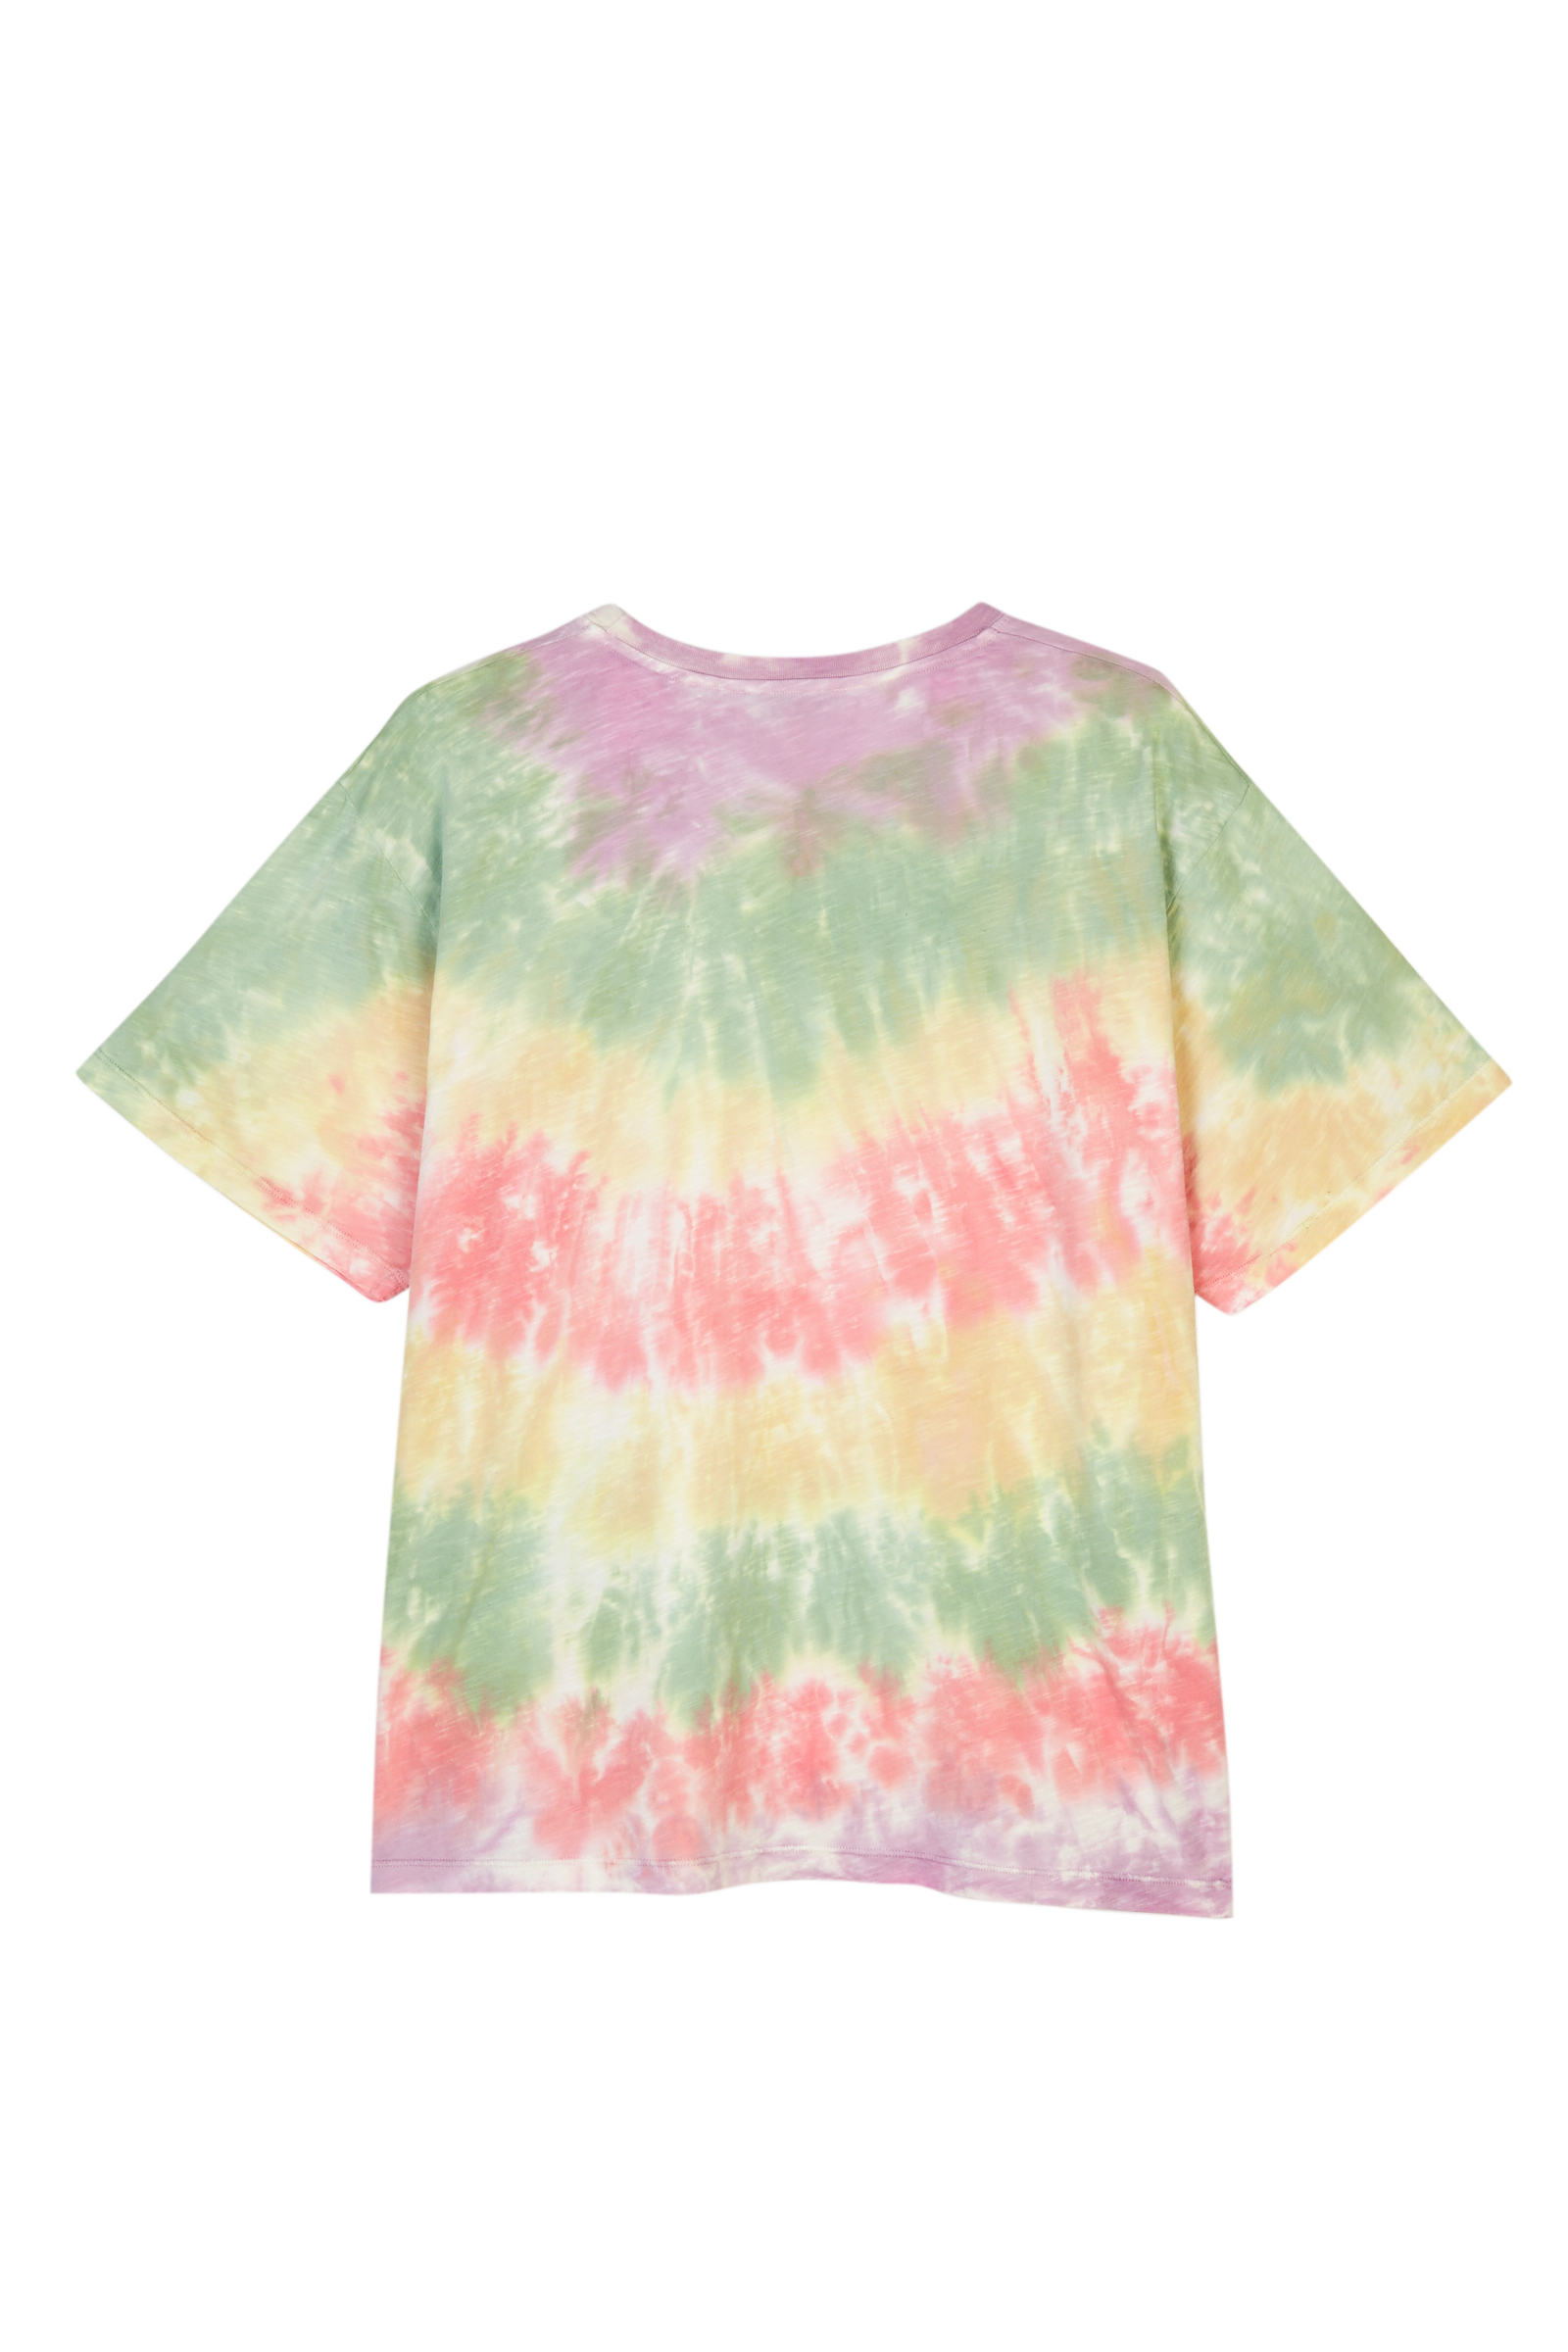 Embroidered Tie Dye T-Shirt 